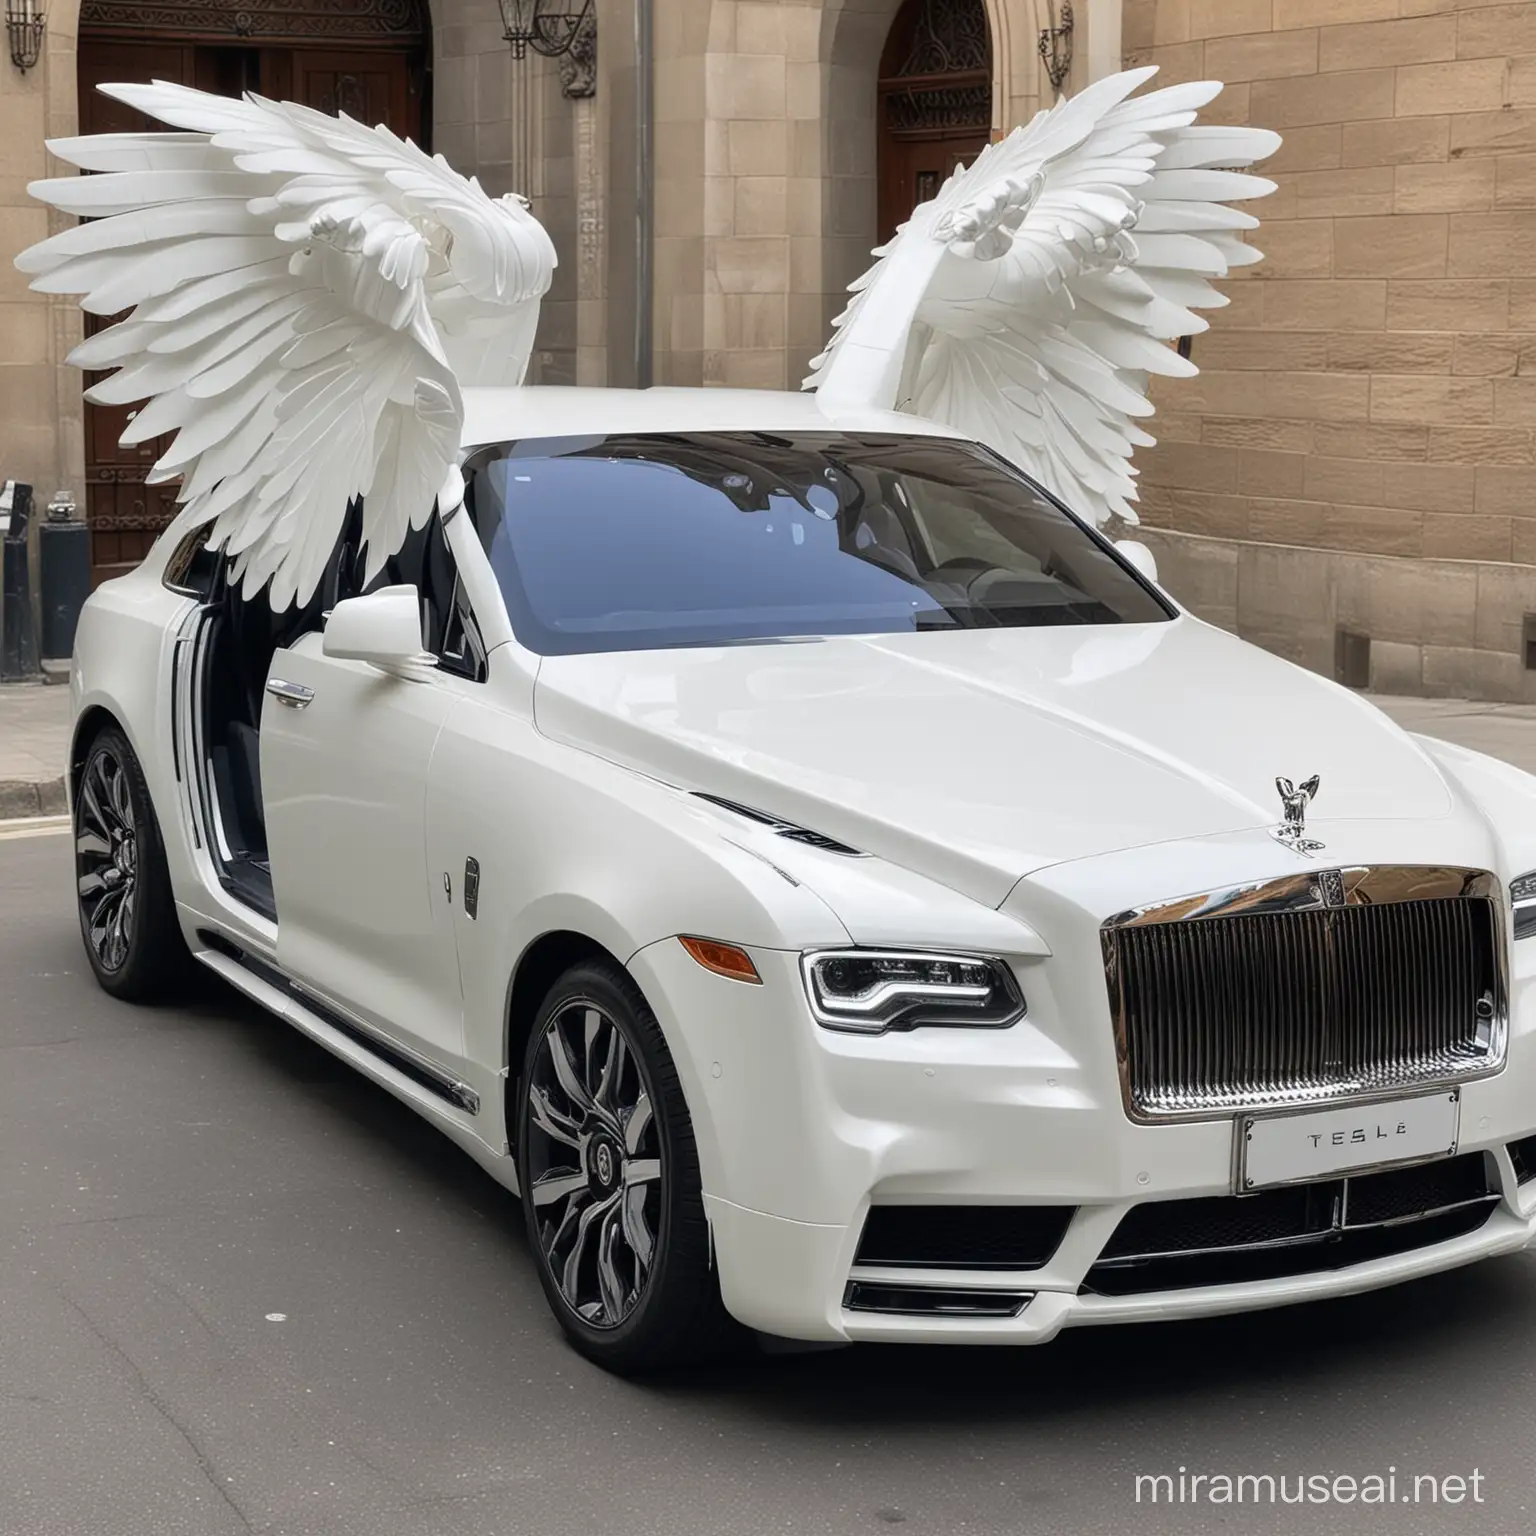 Luxury Sedan with Rolls Royce Front and Butterfly Doors in White Color